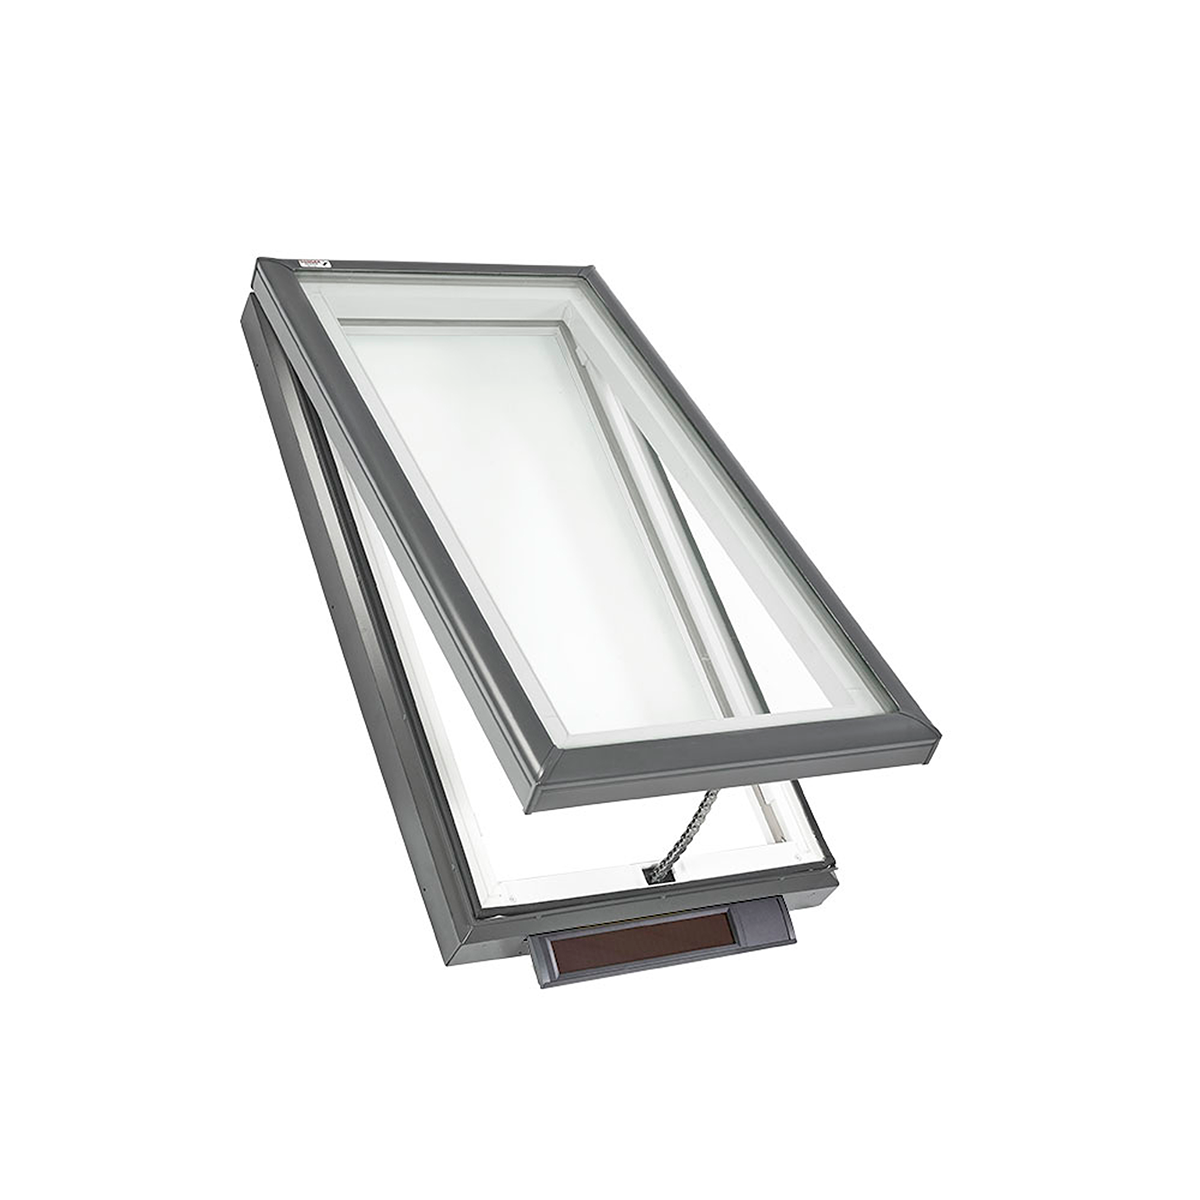 Solar Powered Curb-Mount Skylight with Laminated Low-E3 Glass - 22-1/2 in. x 34-1/2 in. - VCS 2234